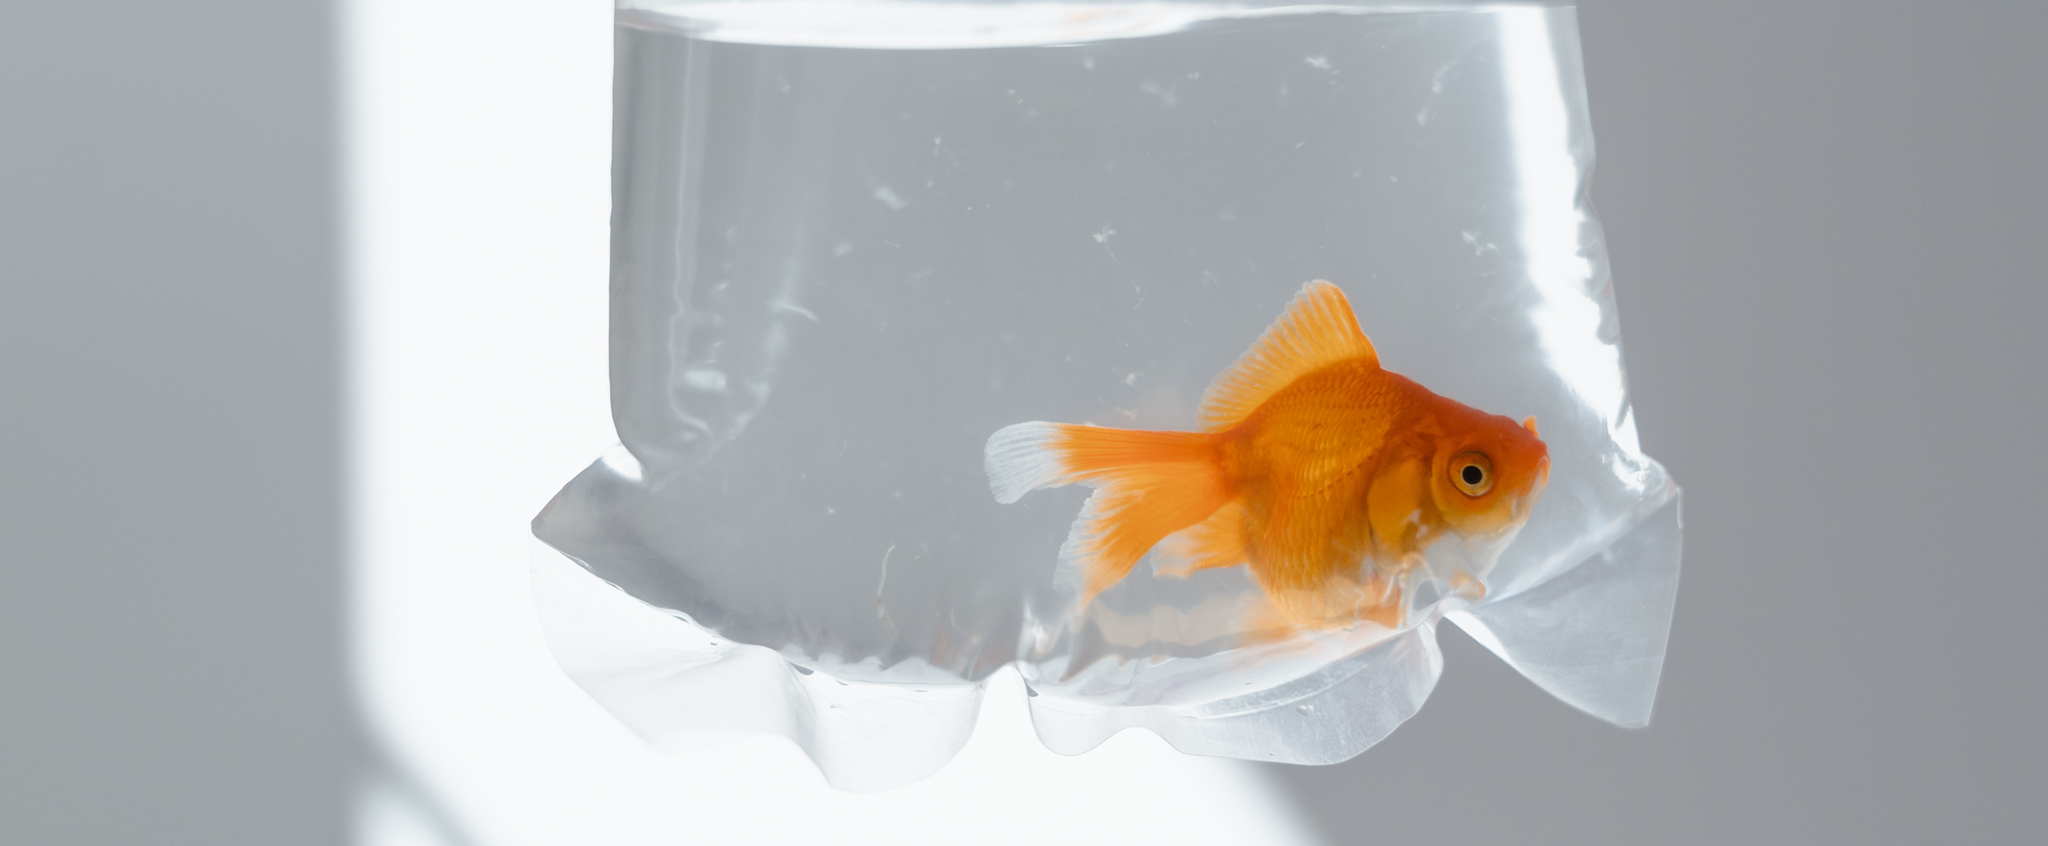 Photo by MART PRODUCTION from Pexels: https://www.pexels.com/photo/a-goldfish-in-a-plastic-bag-8434694/